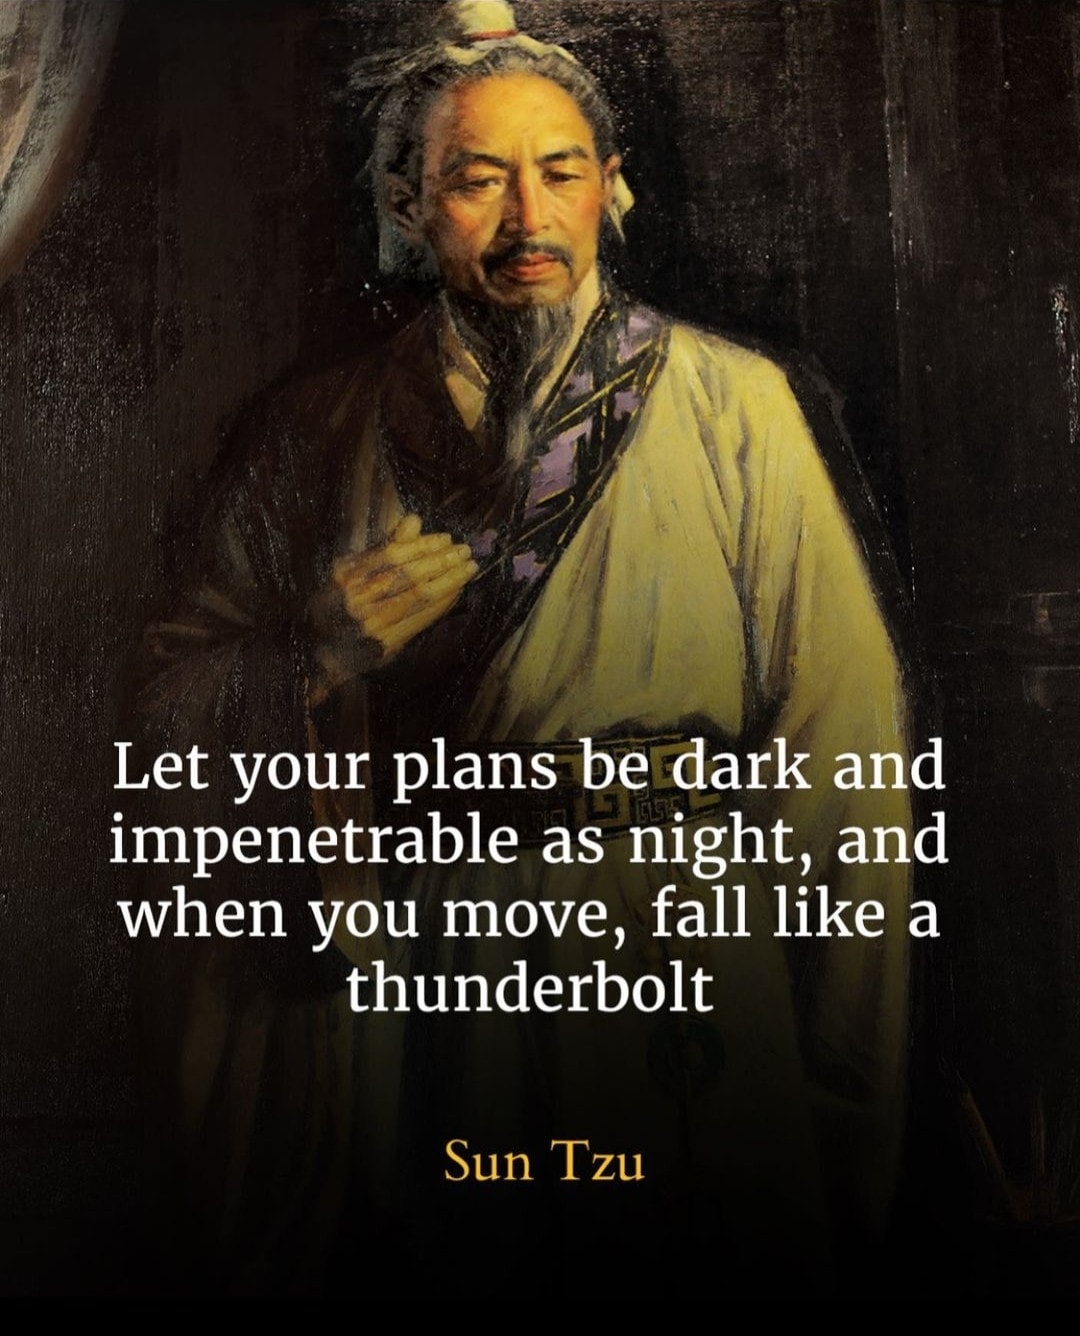 Let your plans be dark and impenetrable as night, and when you move, fall like a thunderbolt – Sun Tzu: